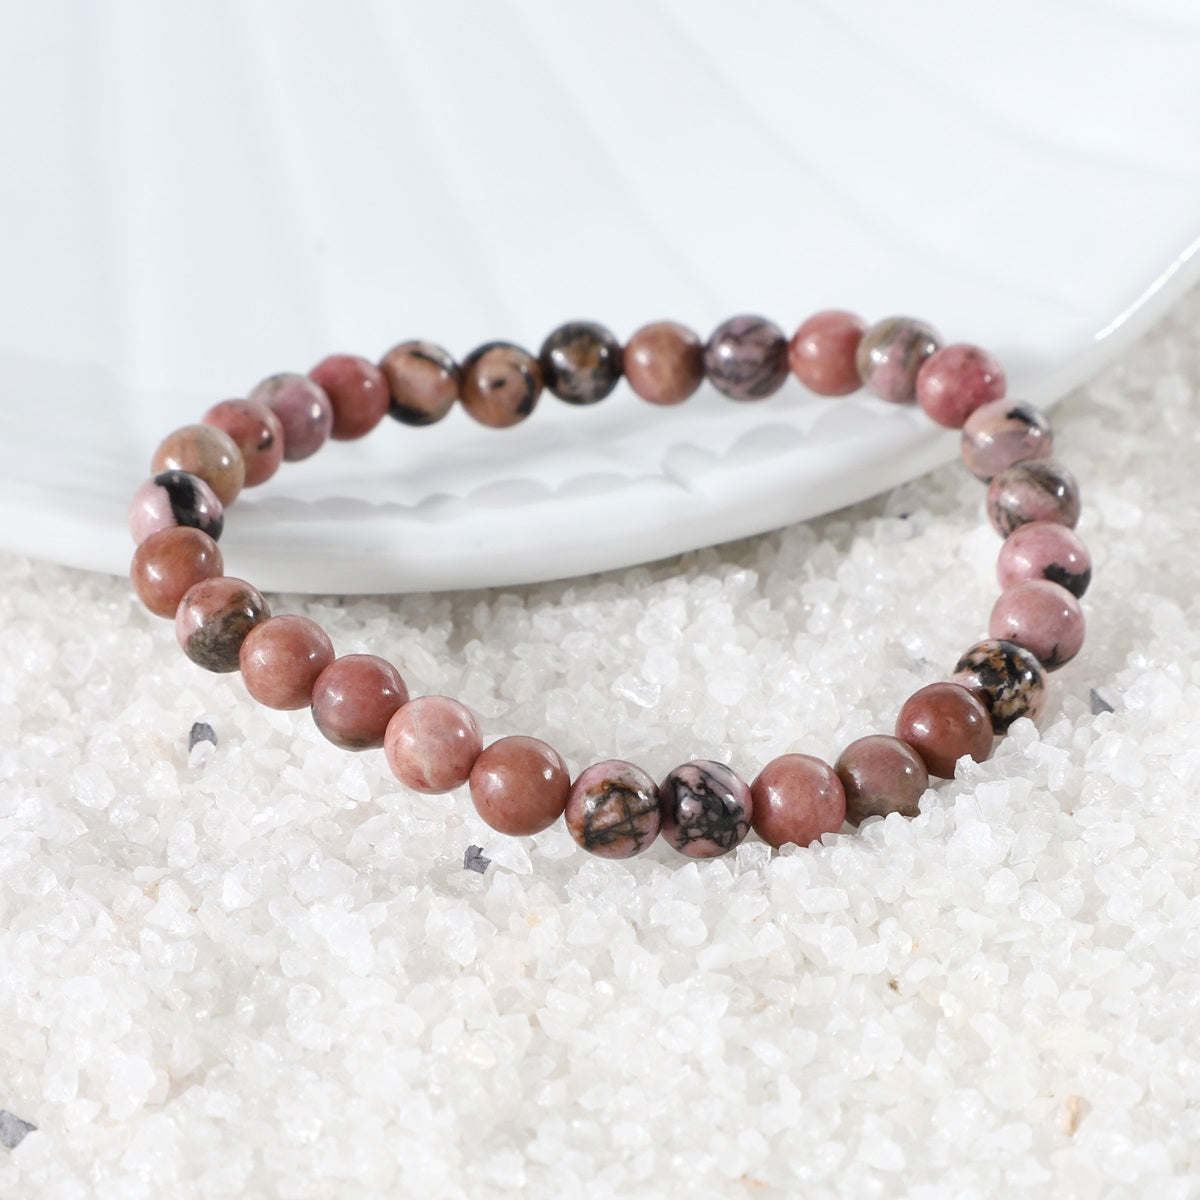 Various styling ideas for the Rhodonite Stretch Bracelet, demonstrating its versatility as a chic accessory with transformative energies of love and compassion